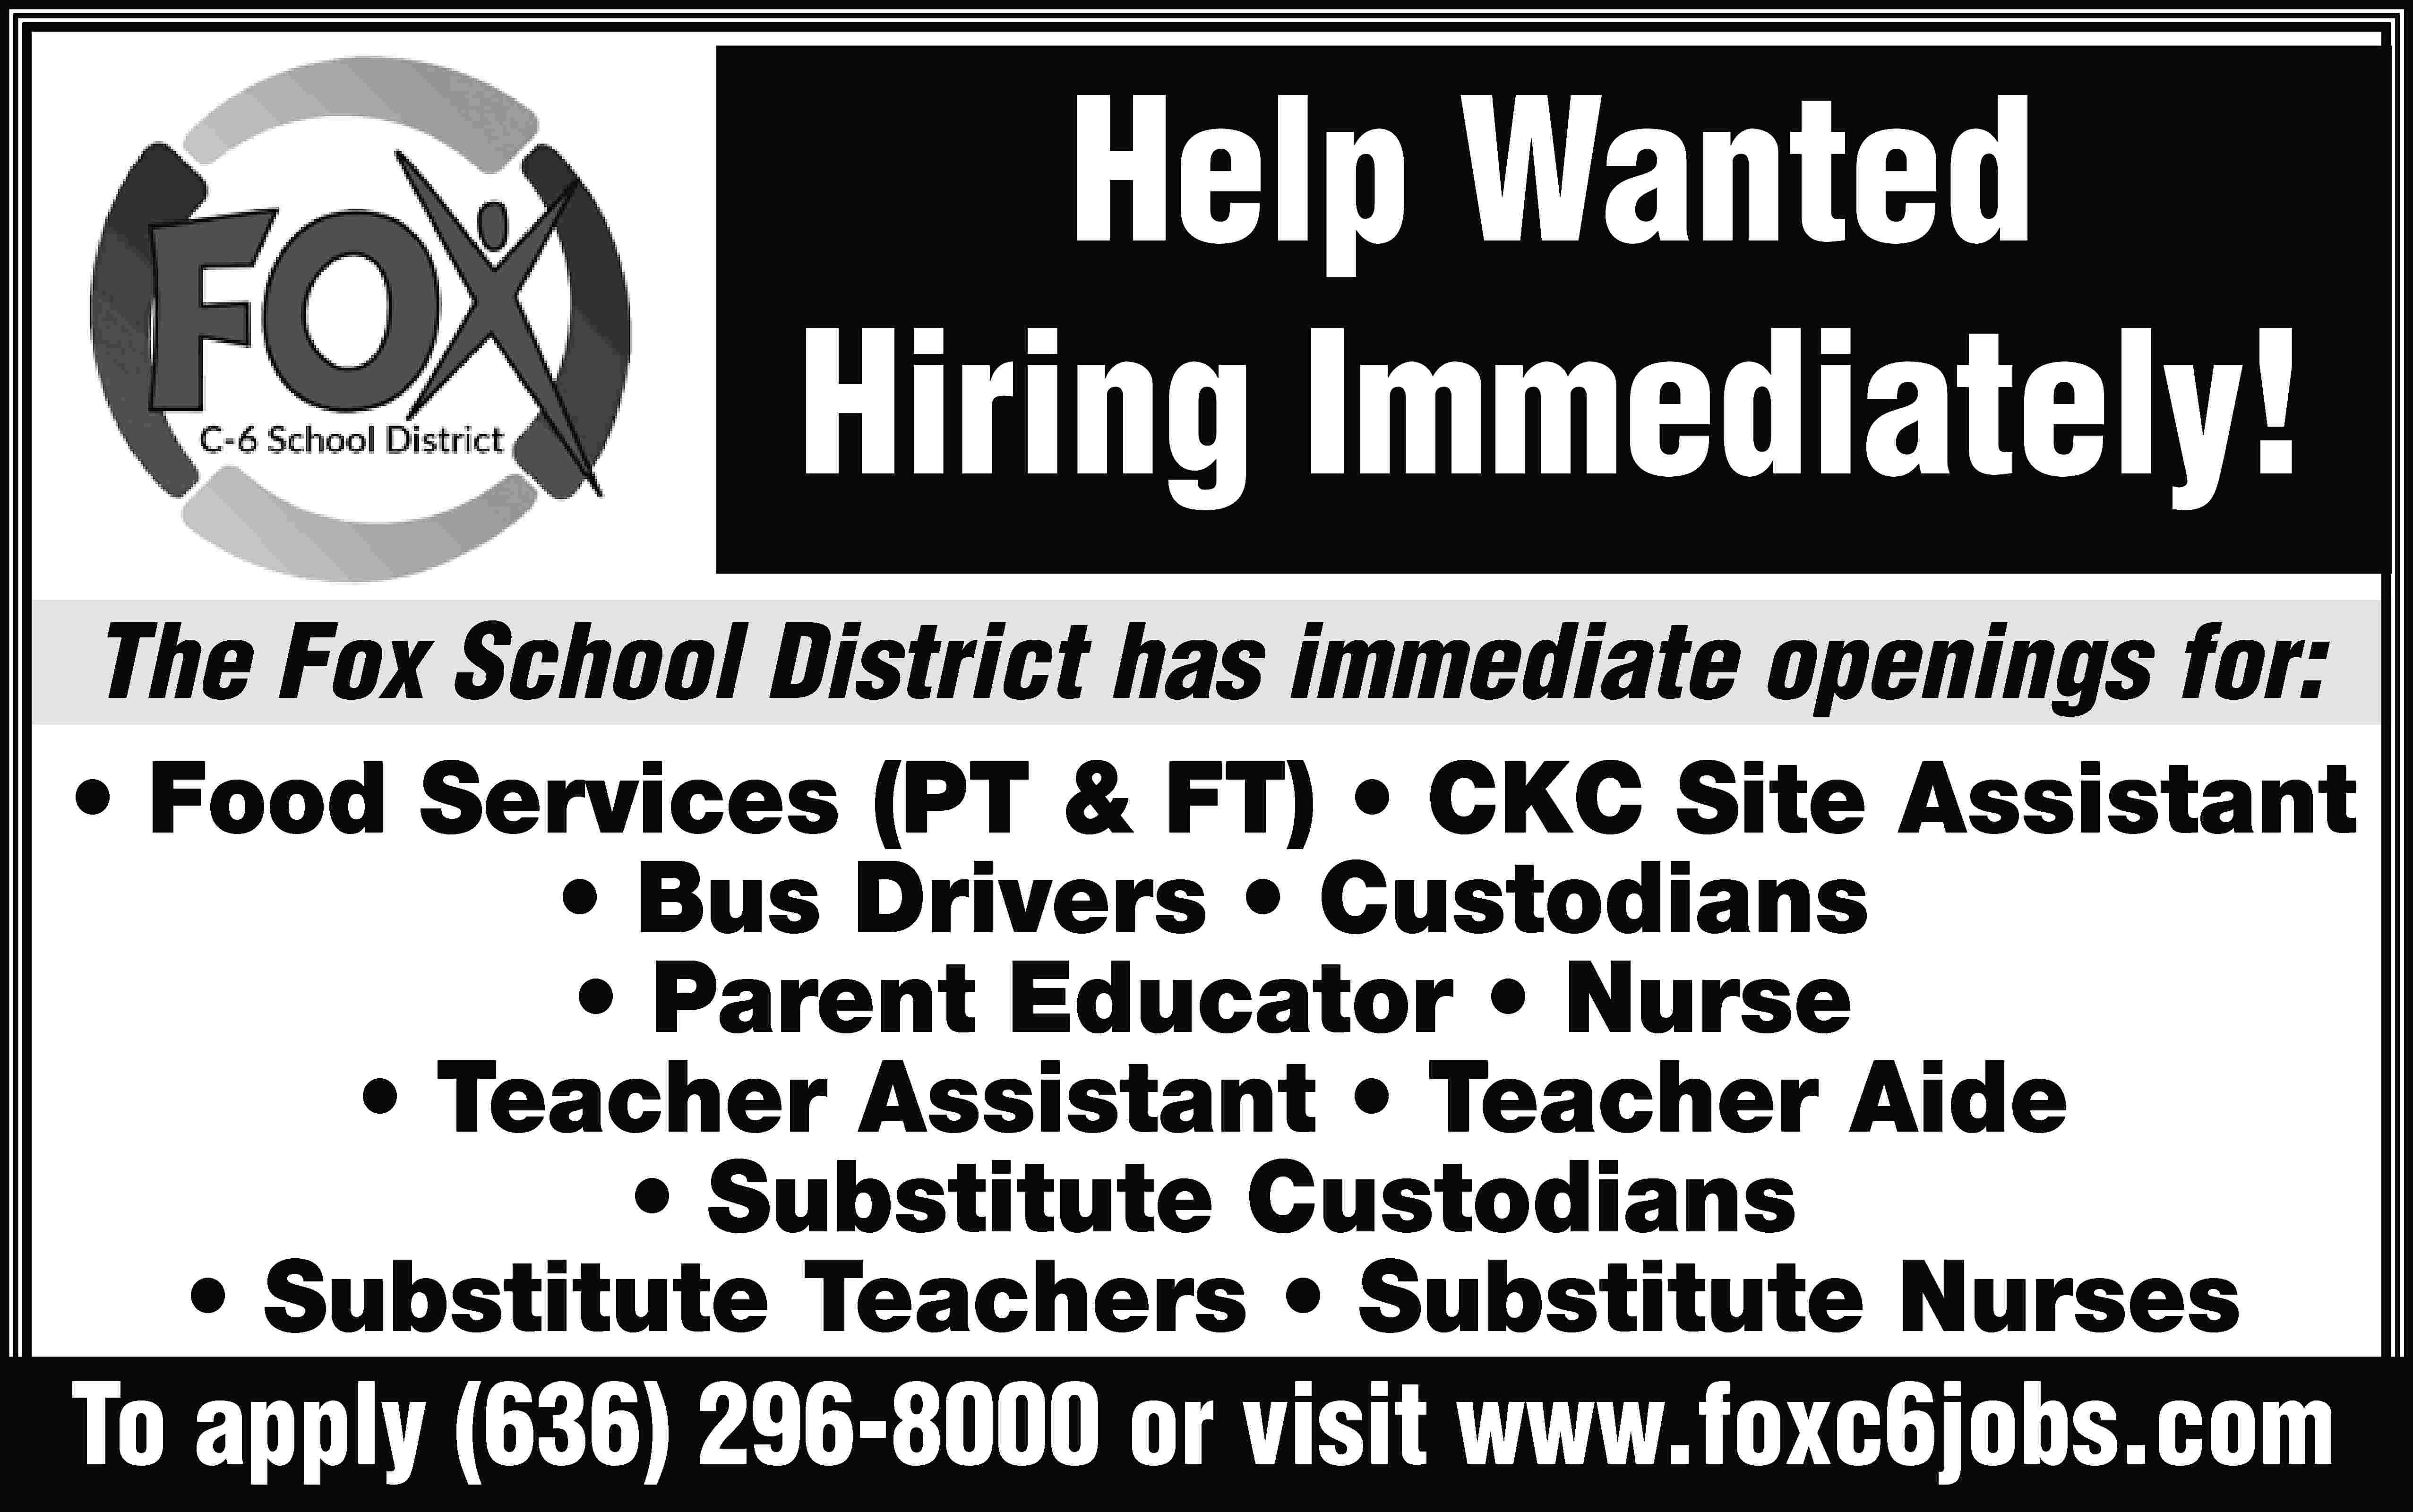 Help Wanted Hiring Immediately! The  Help Wanted Hiring Immediately! The Fox School District has immediate openings for: • Food Services (PT & FT) • CKC Site Assistant • Bus Drivers • Custodians • Parent Educator • Nurse • Teacher Assistant • Teacher Aide • Substitute Custodians • Substitute Teachers • Substitute Nurses To apply (636) 296-8000 or visit www.foxc6jobs.com